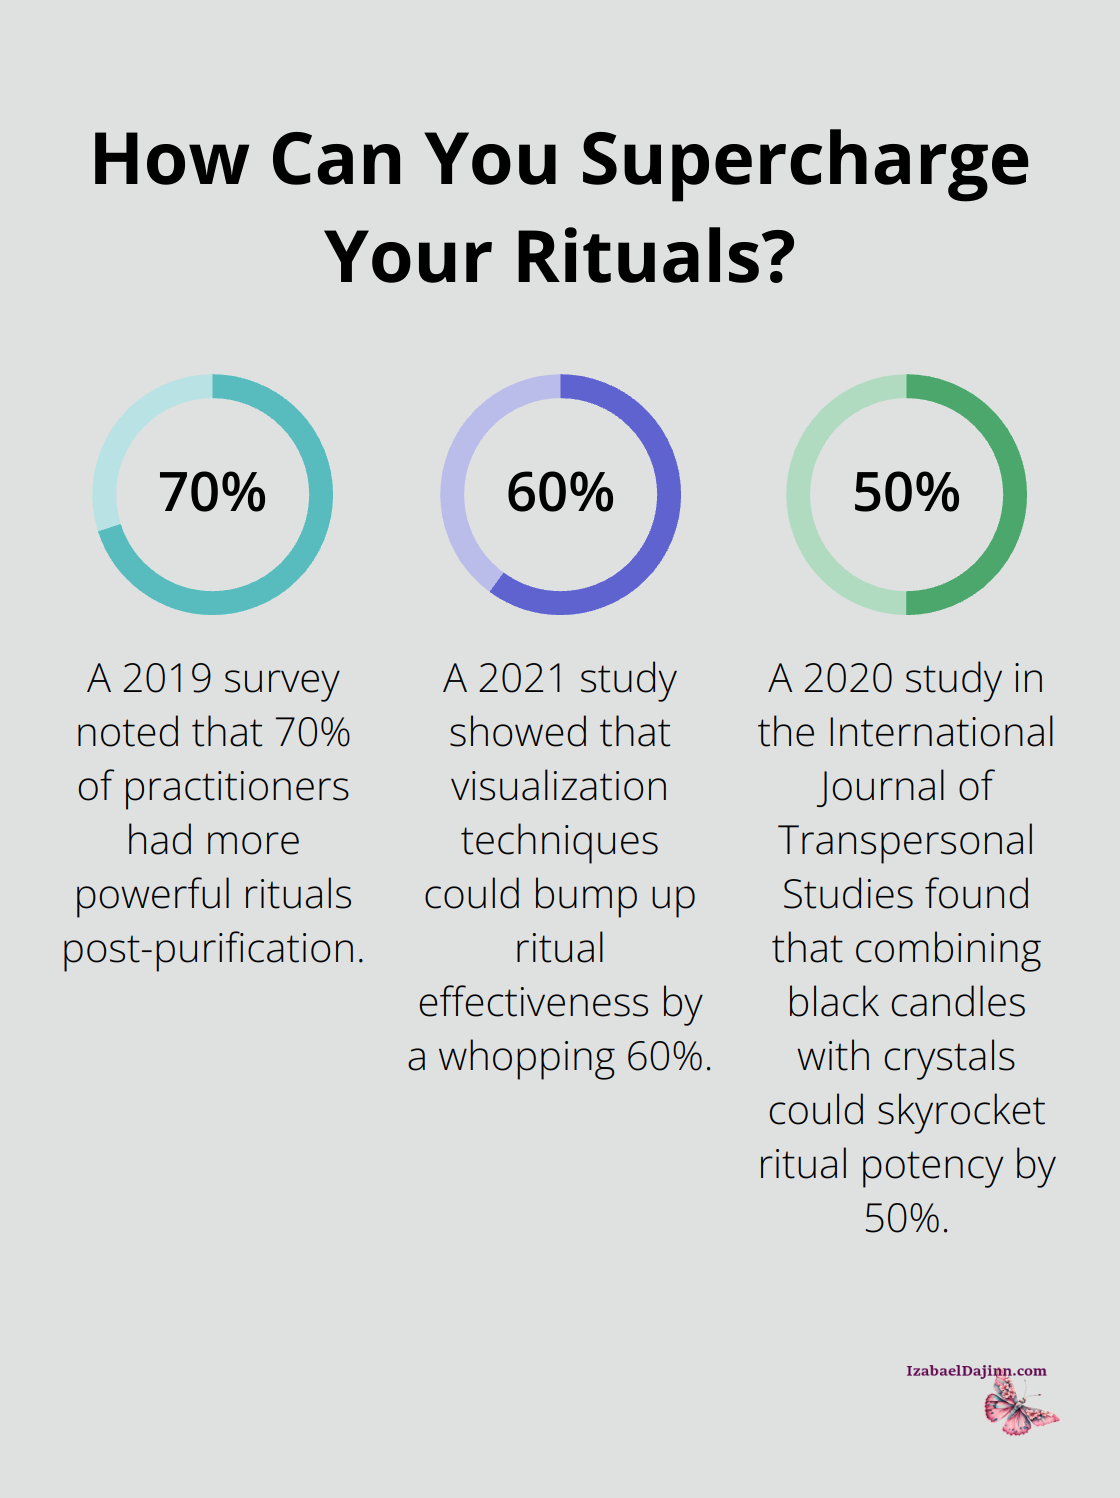 Fact - How Can You Supercharge Your Rituals?